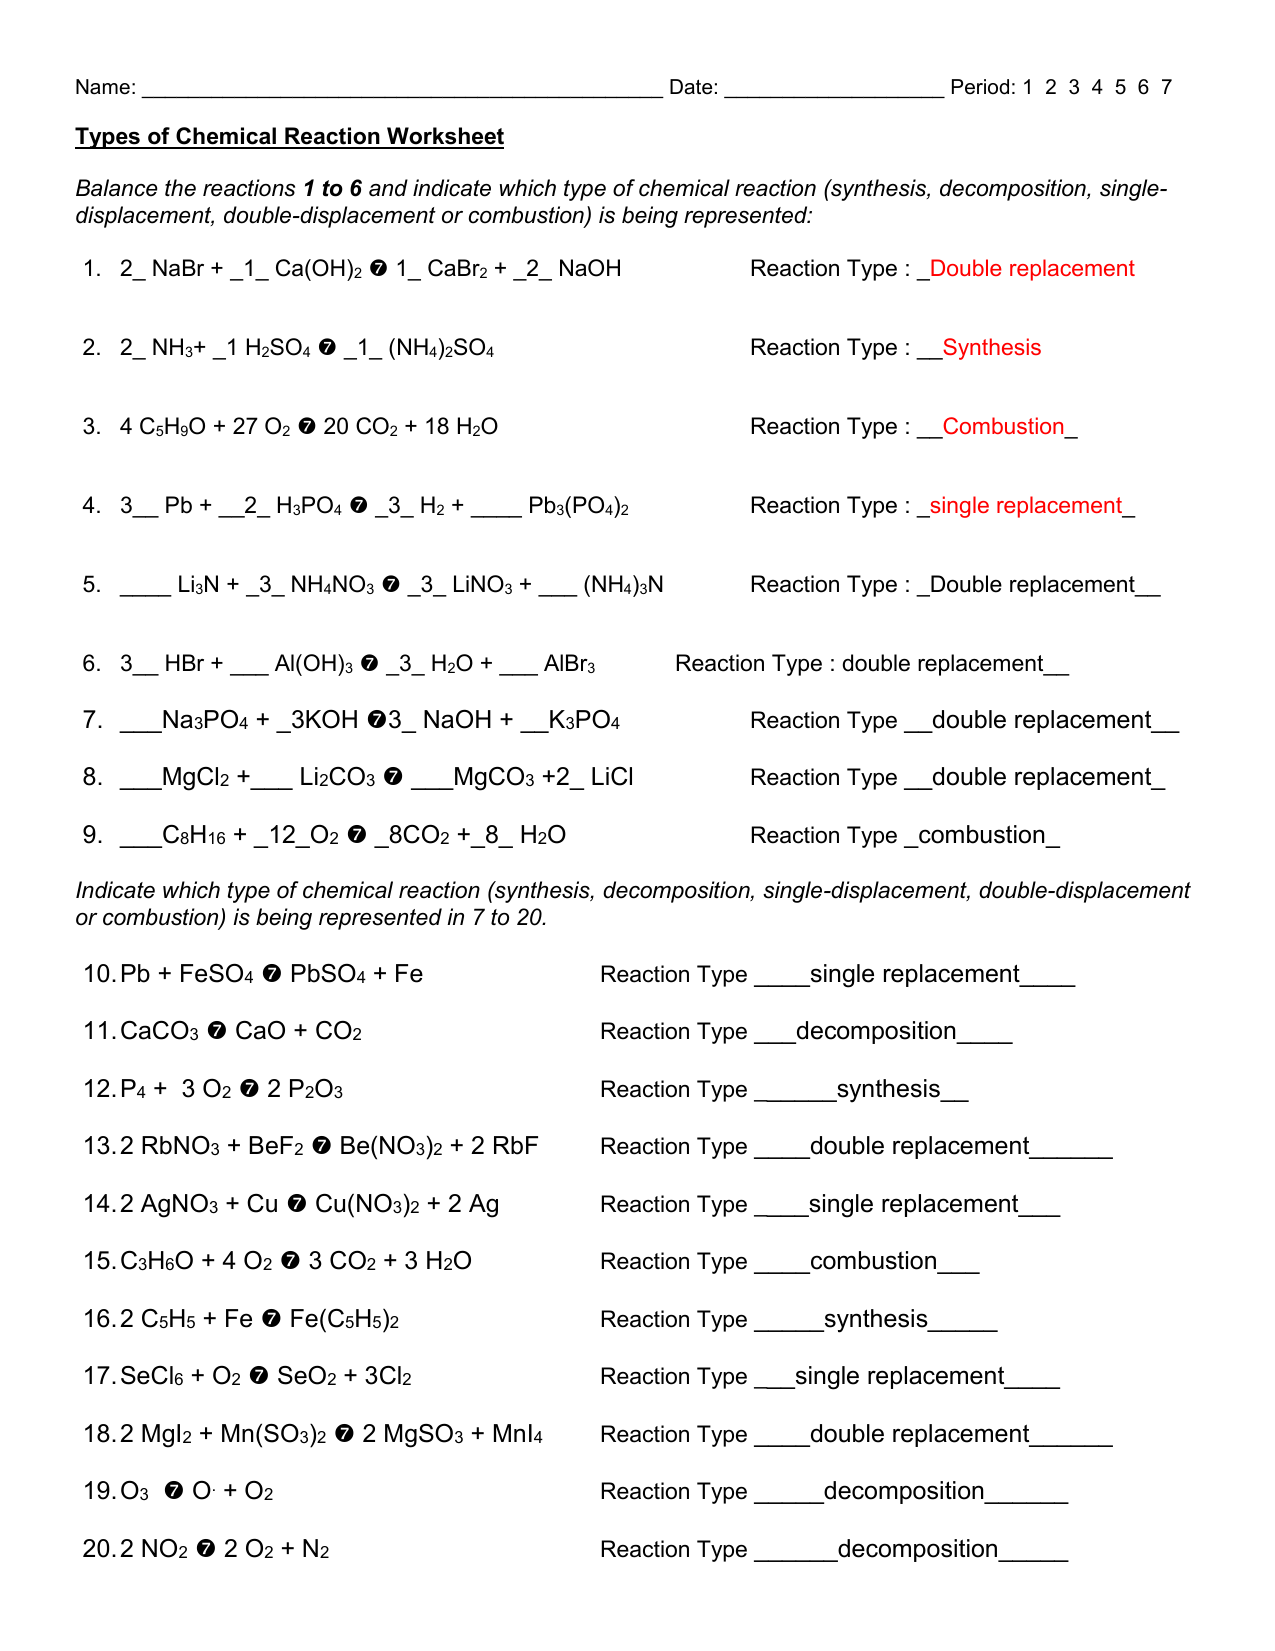 Types of Chemical Reaction Worksheetanswers Within Chemical Reactions Types Worksheet